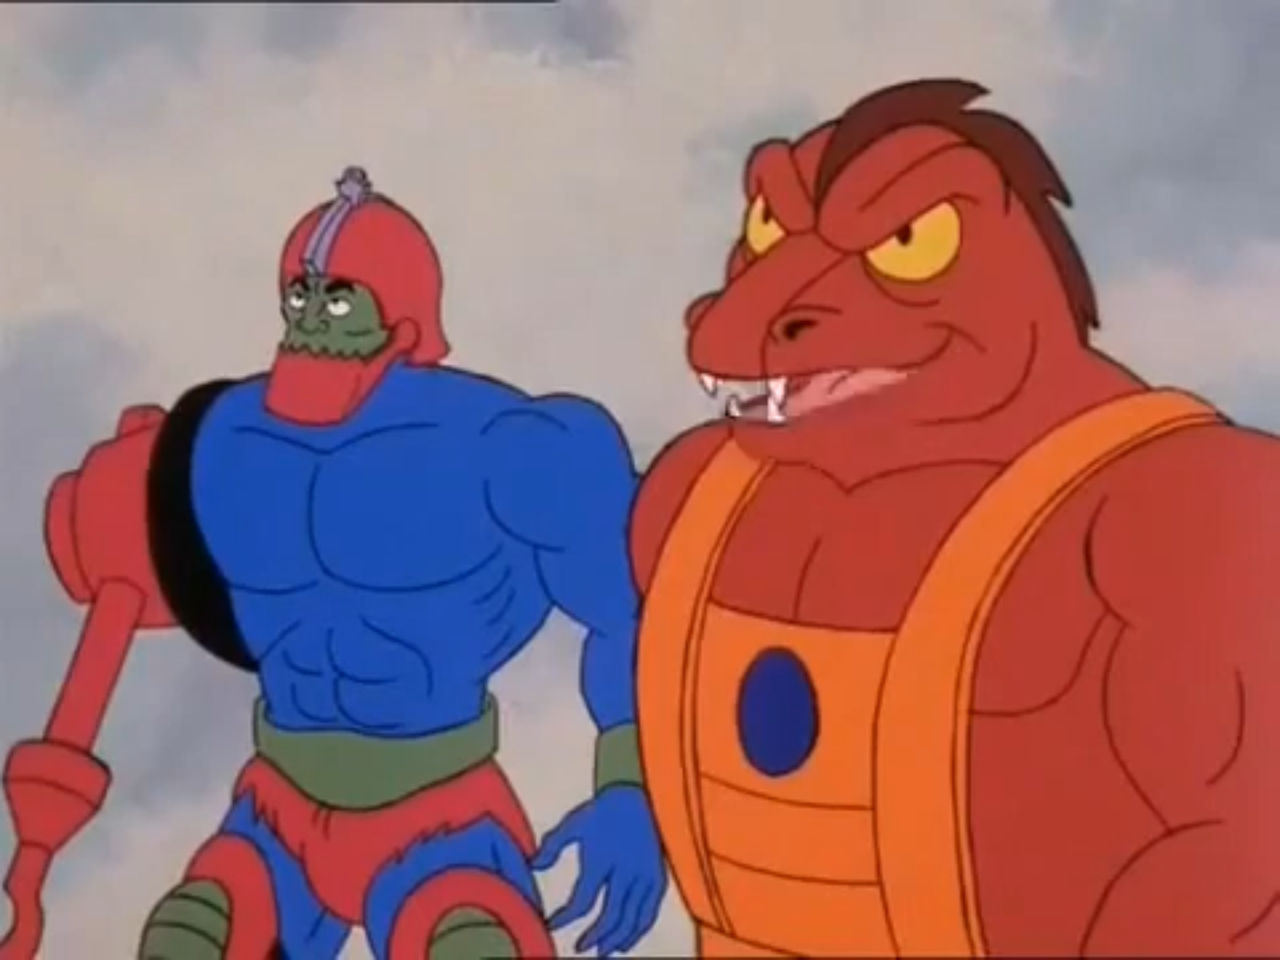 Trapjaw and Clawful are dedicated employees with disabilities on Eternia.